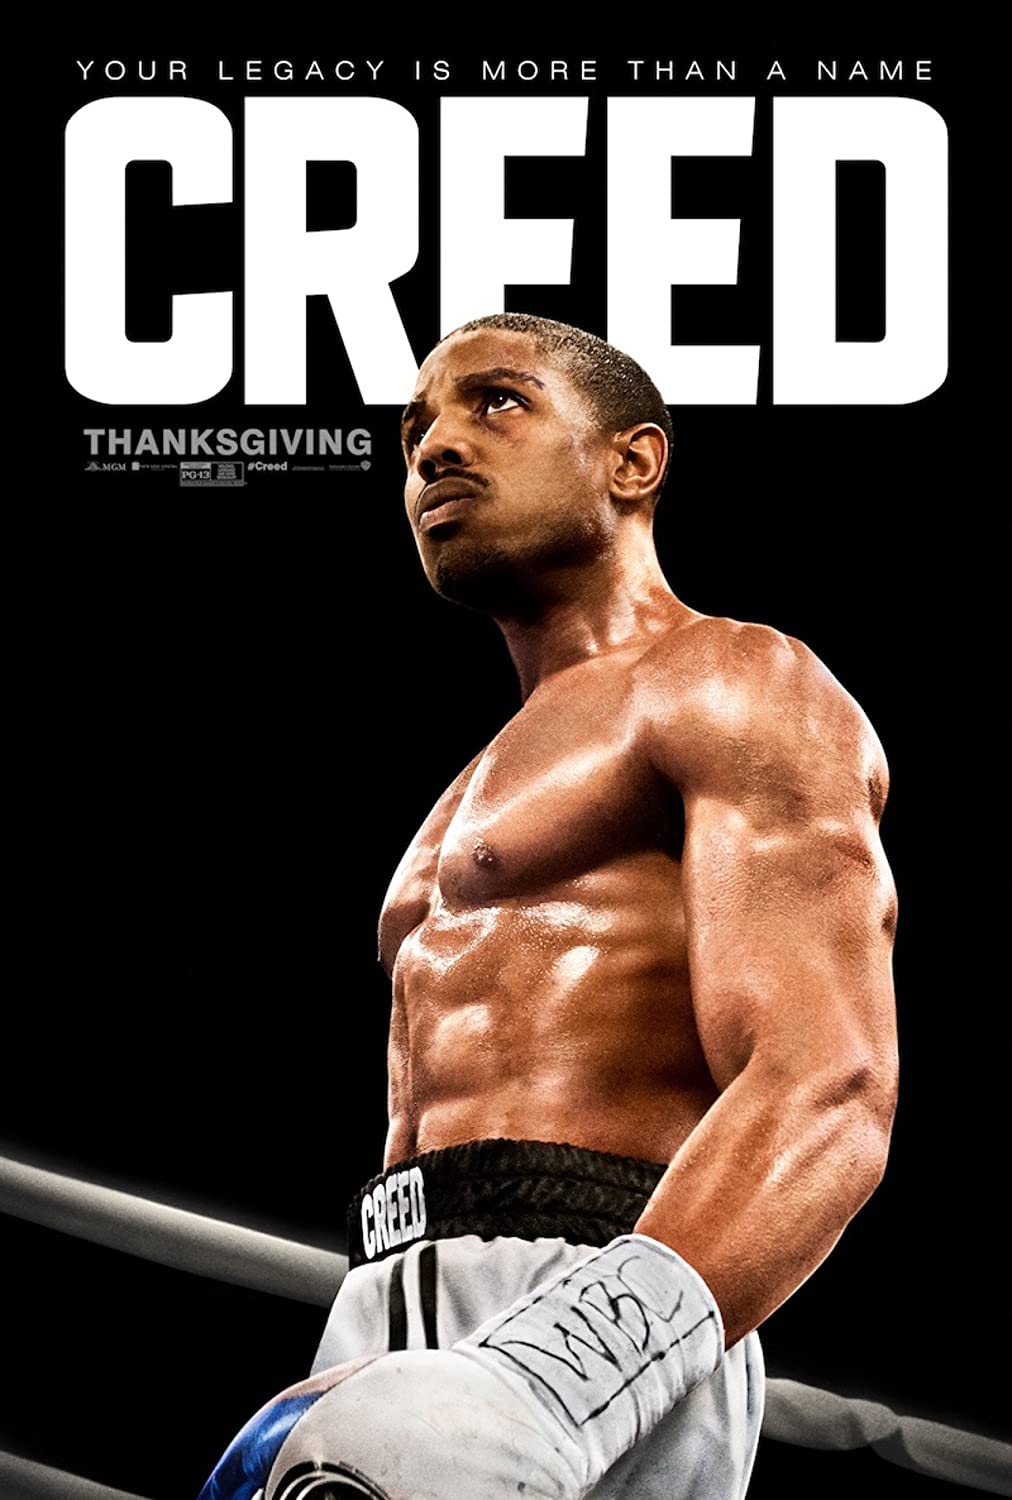 CREED Movie Poster (Adonis) 12 x 18 Inches, Glossy